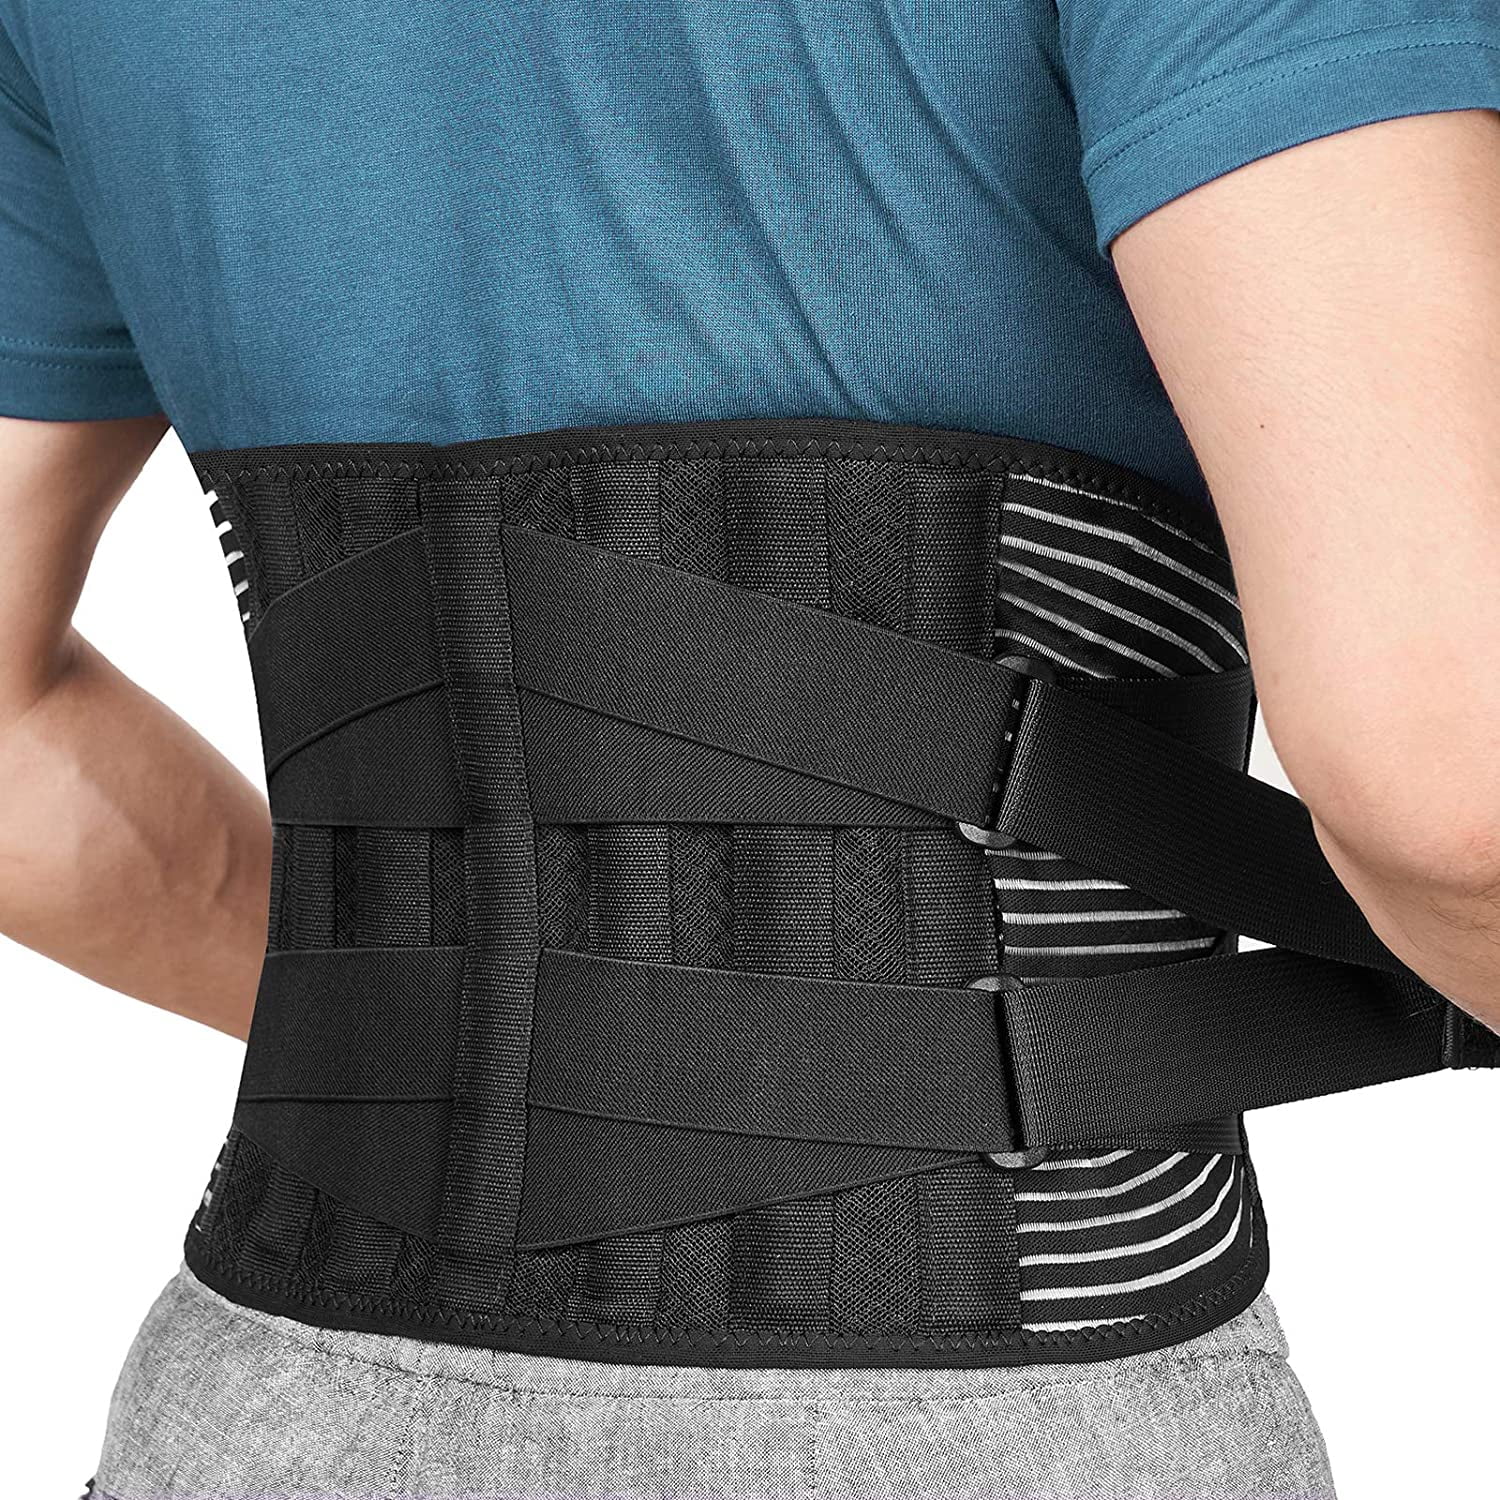 Sensible Spend Lower Back Brace with Suspenders Lumbar Support